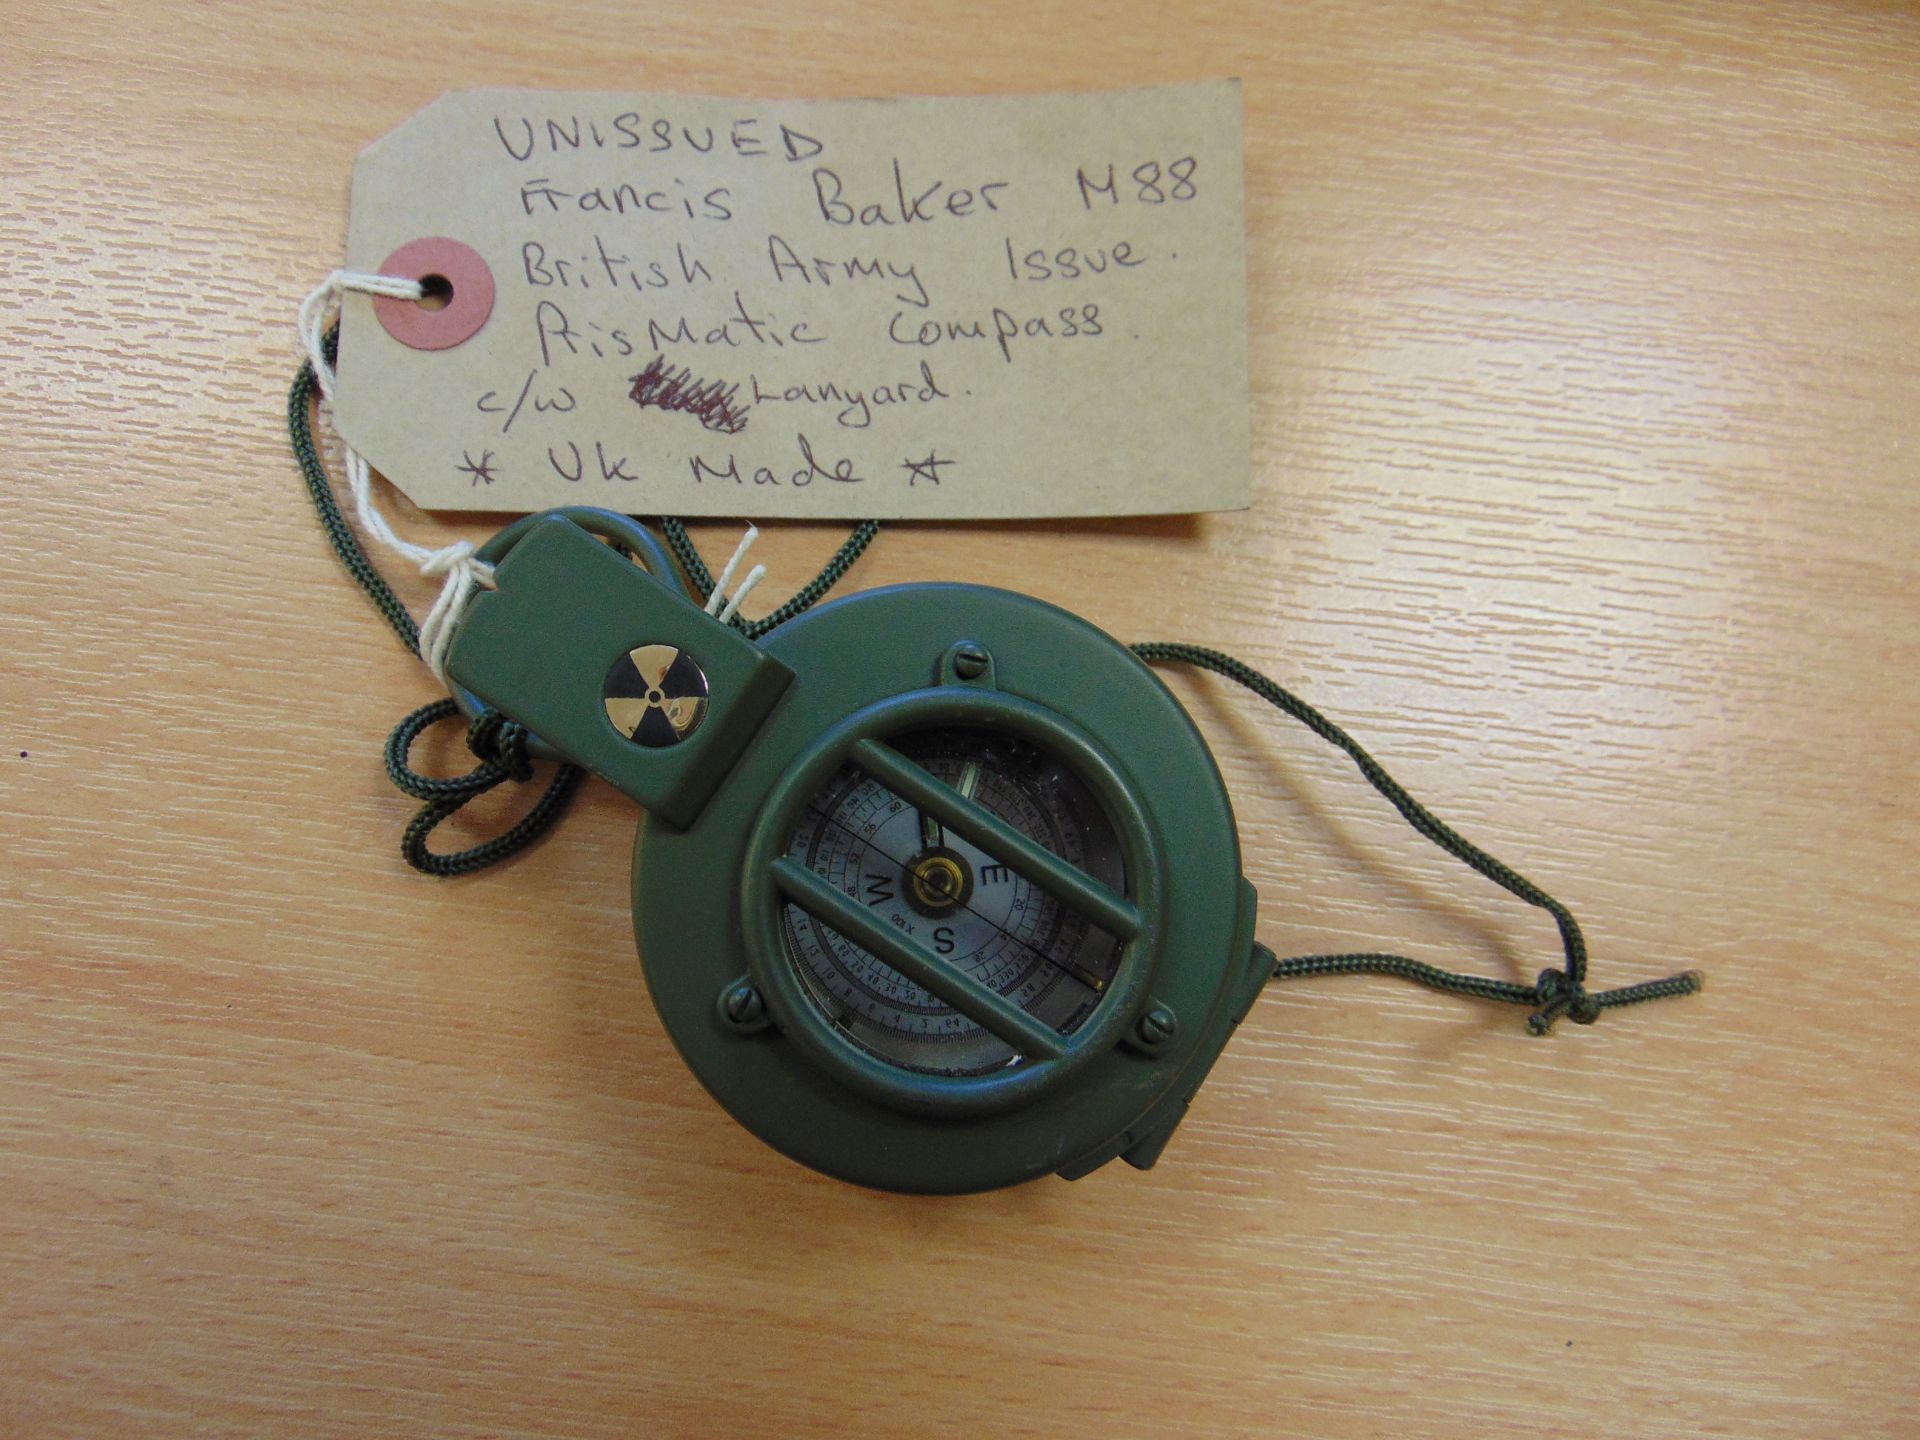 Genuine Unissued British Army Francis Barker M88 Marching Compass